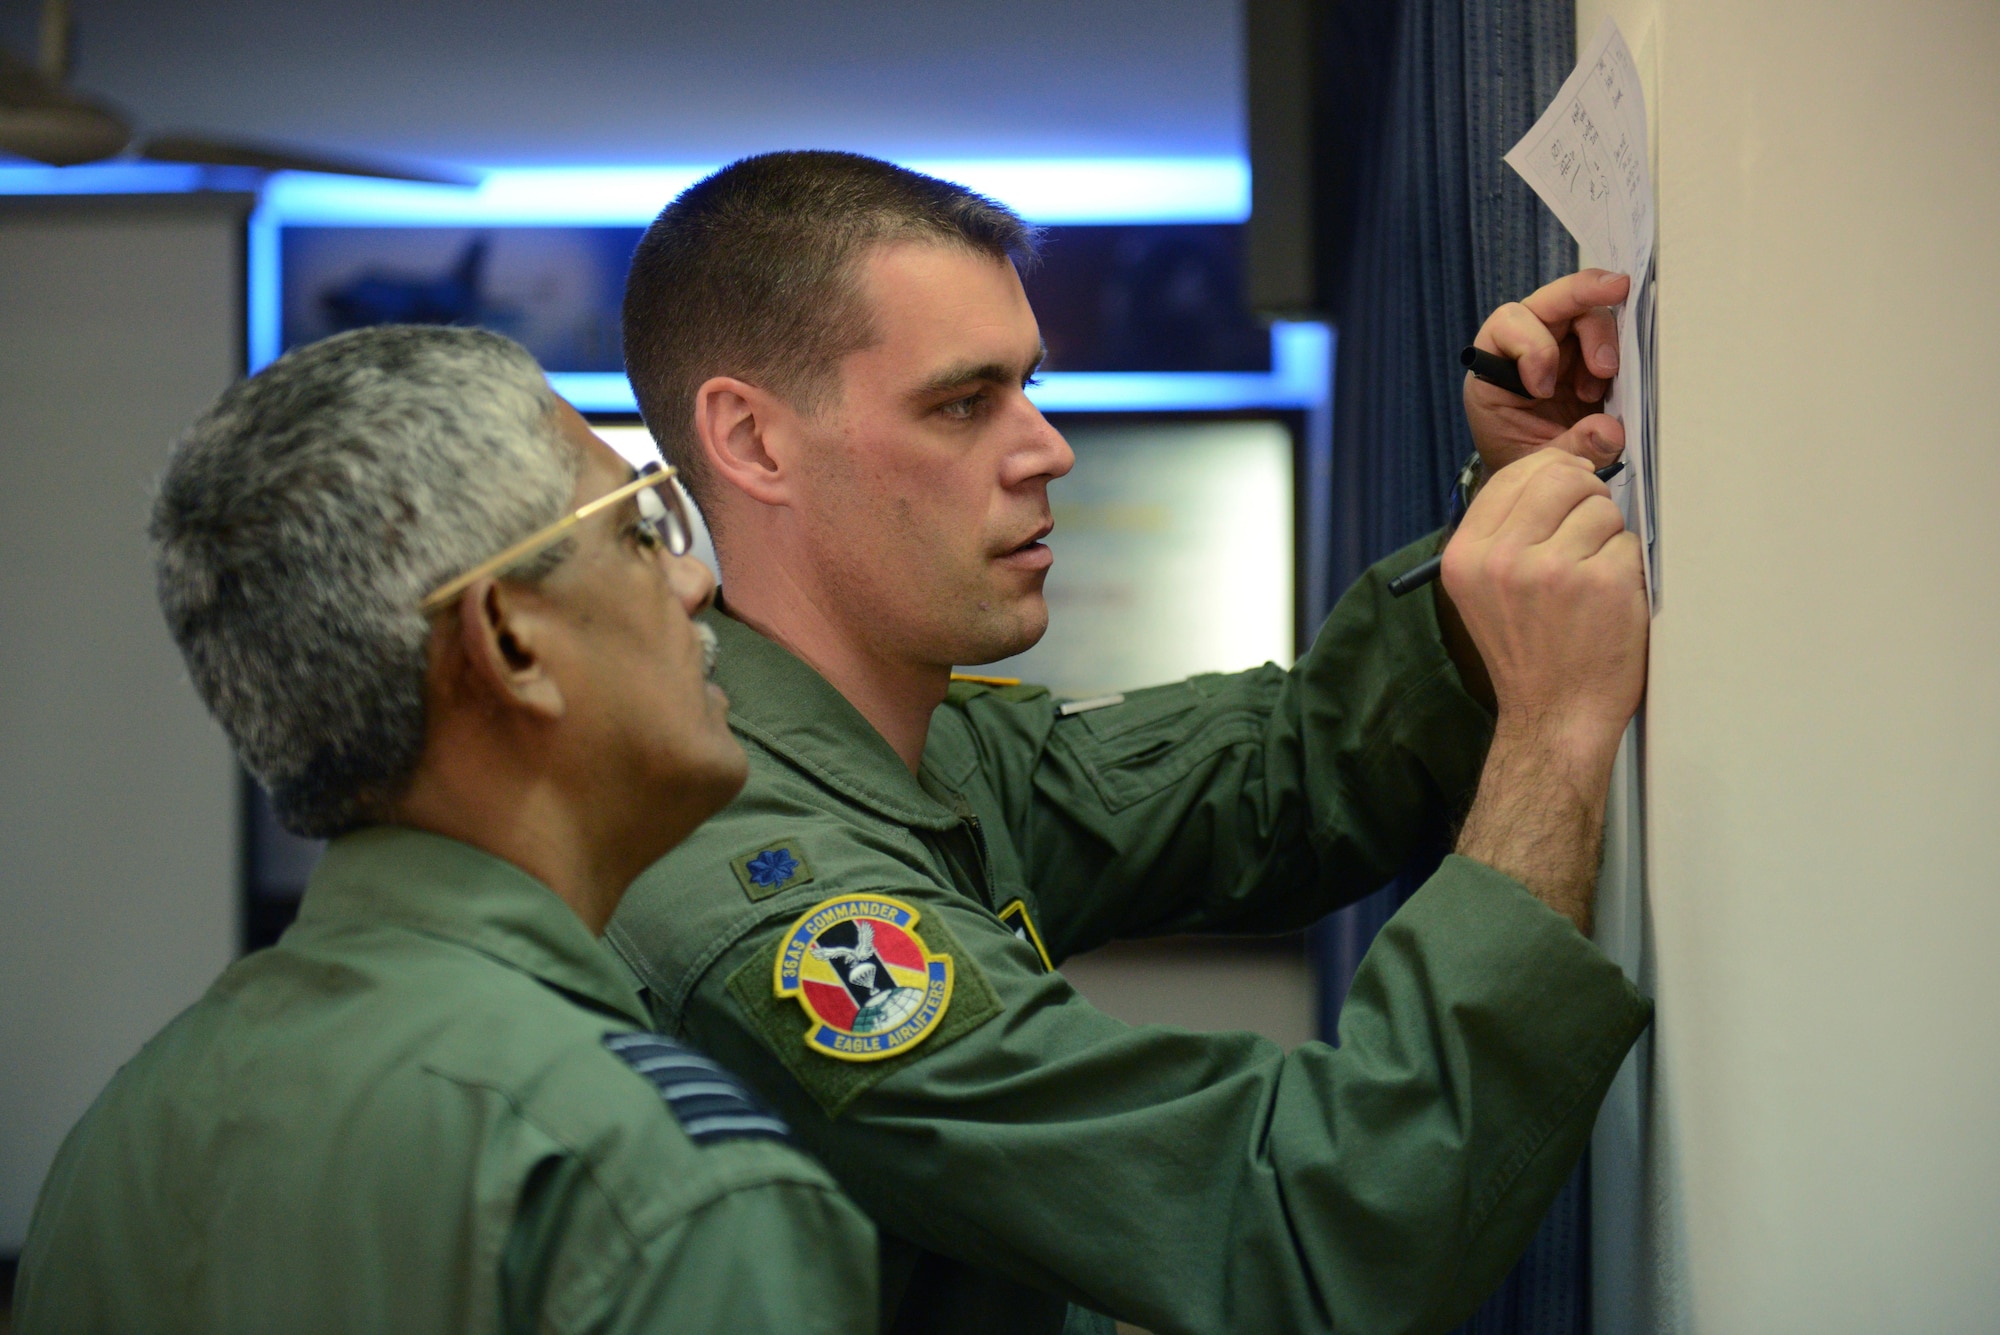 Lt. Col. Andrew Campbell, right, discusses a mission with Bangladesh air force Group Captain Awal Hossain during Cope South 15 Jan. 28, 2015, at BAF Base Bangabandhu, Bangladesh. Cope South is a Pacific Air Forces-sponsored, bilateral tactical airlift exercise conducted in Bangladesh, with a focus on cooperative flight operations, day and night low-level navigation, tactical airdrop, and air-land missions; as well as subject matter expert exchanges in the fields of operations, maintenance and rigging disciplines. Campbell is the 36th Airlift Squadron commander at Yokota Air Base, Japan. (U.S. Air Force photo/1st Lt. Jake Bailey)